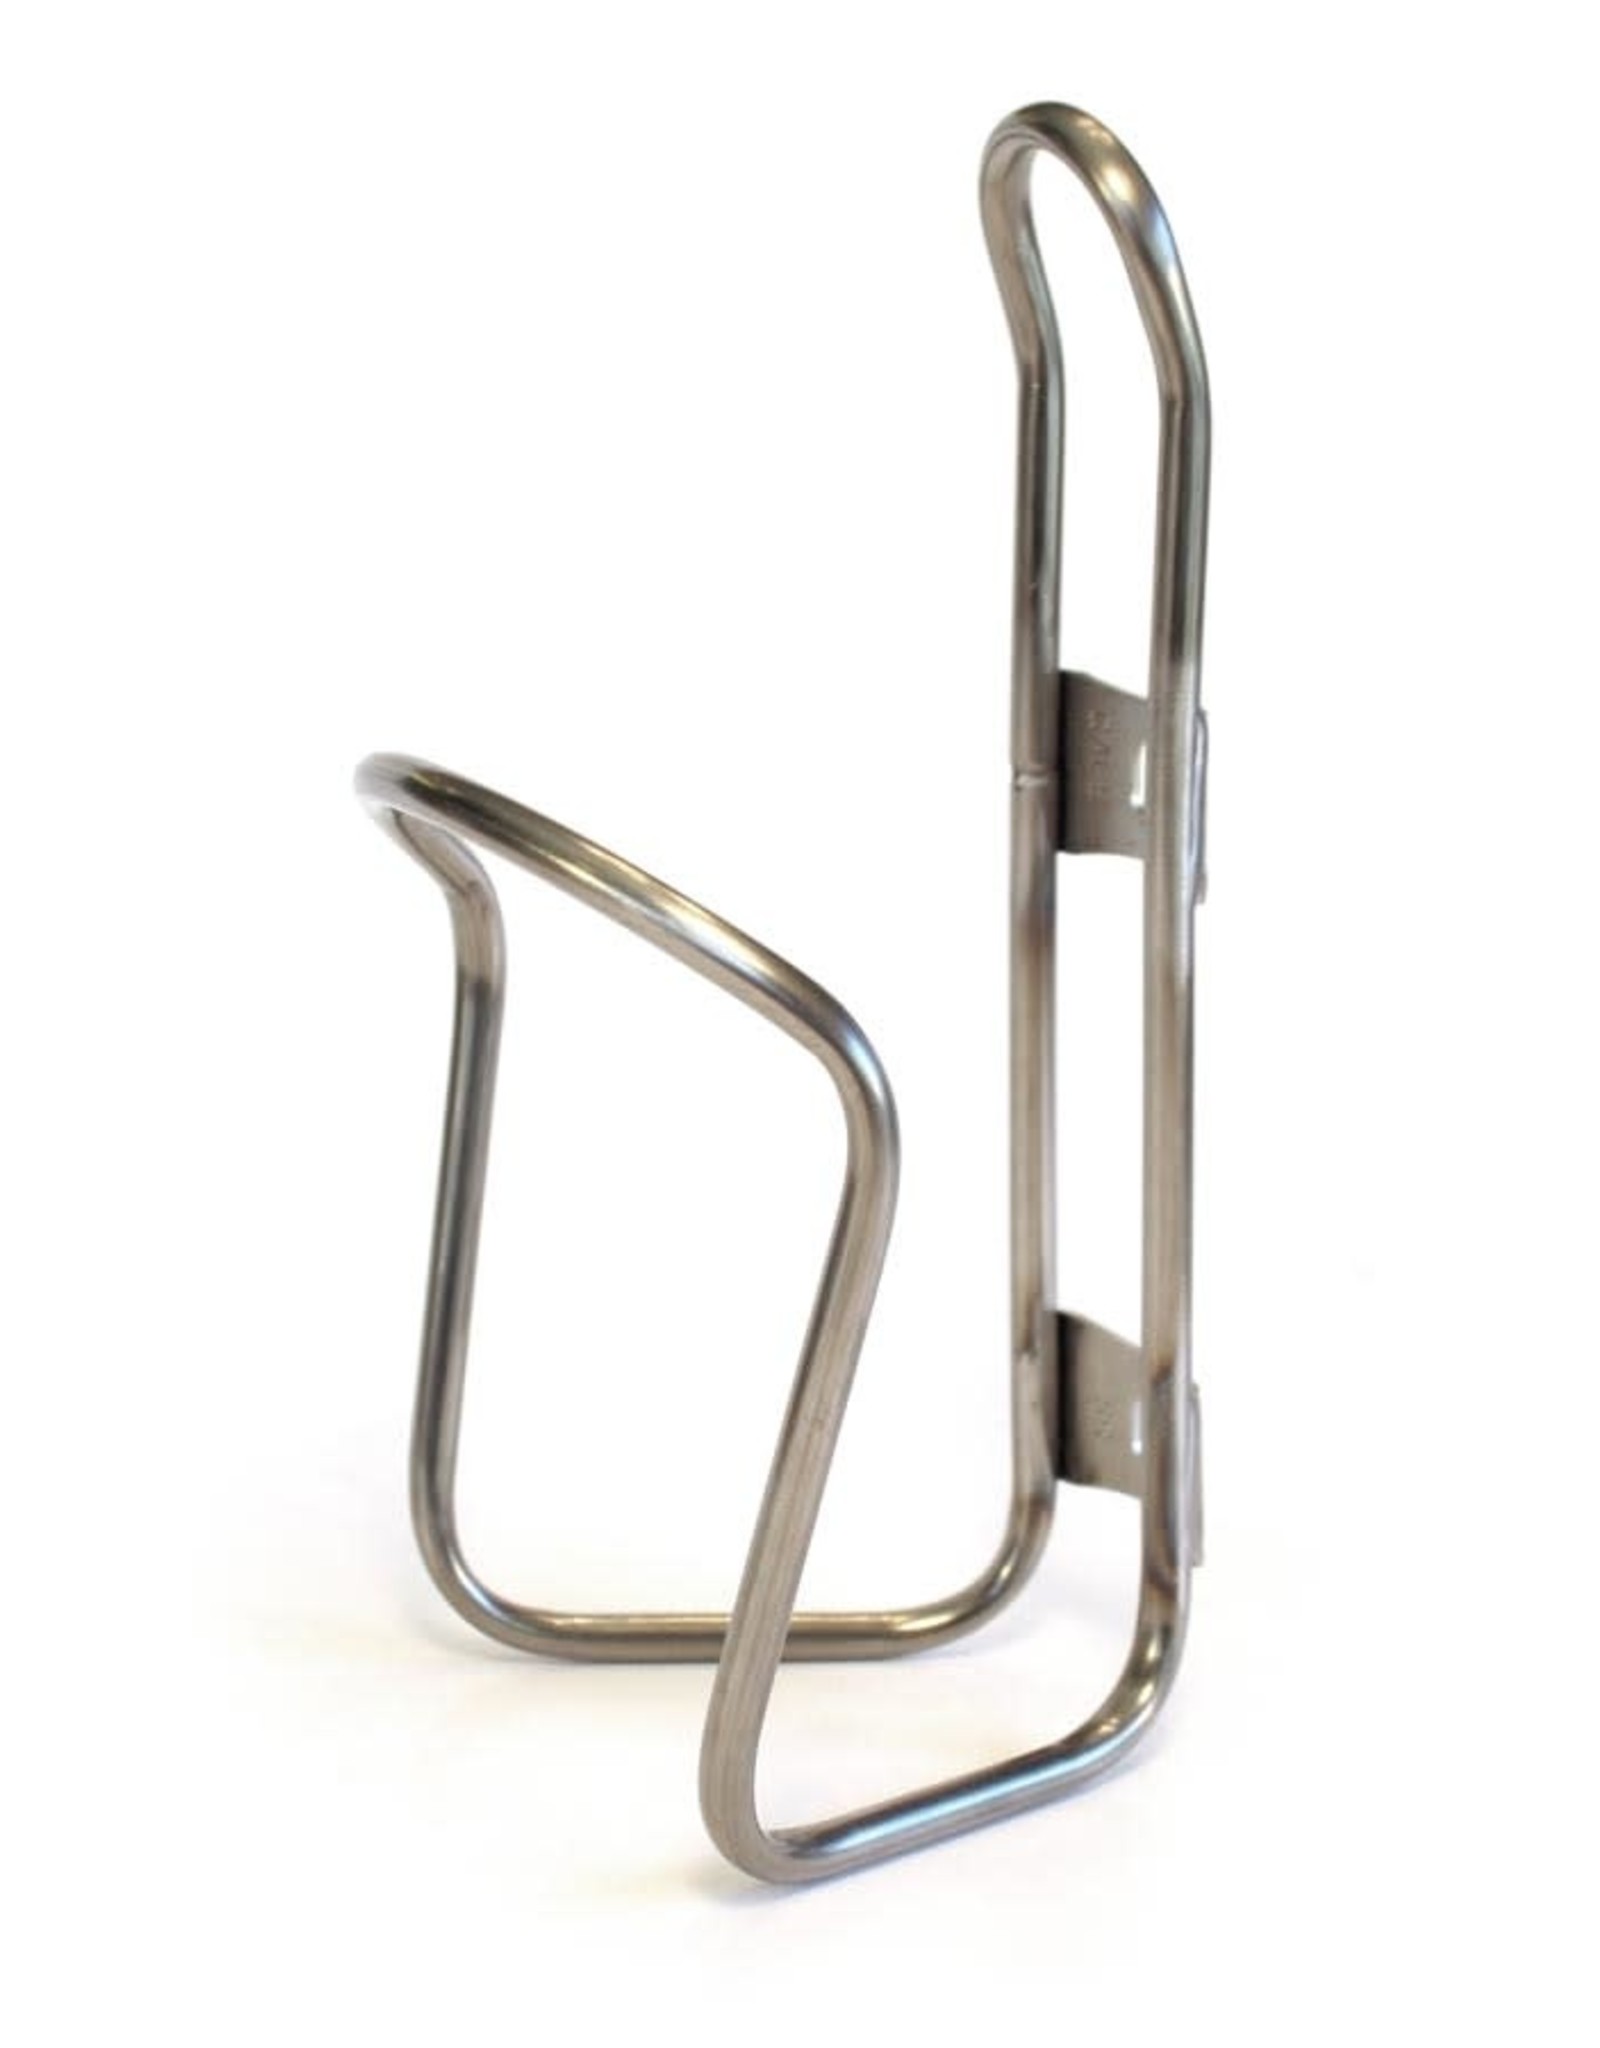 King Cage King Cage Bottle Cage, Stainless Steel